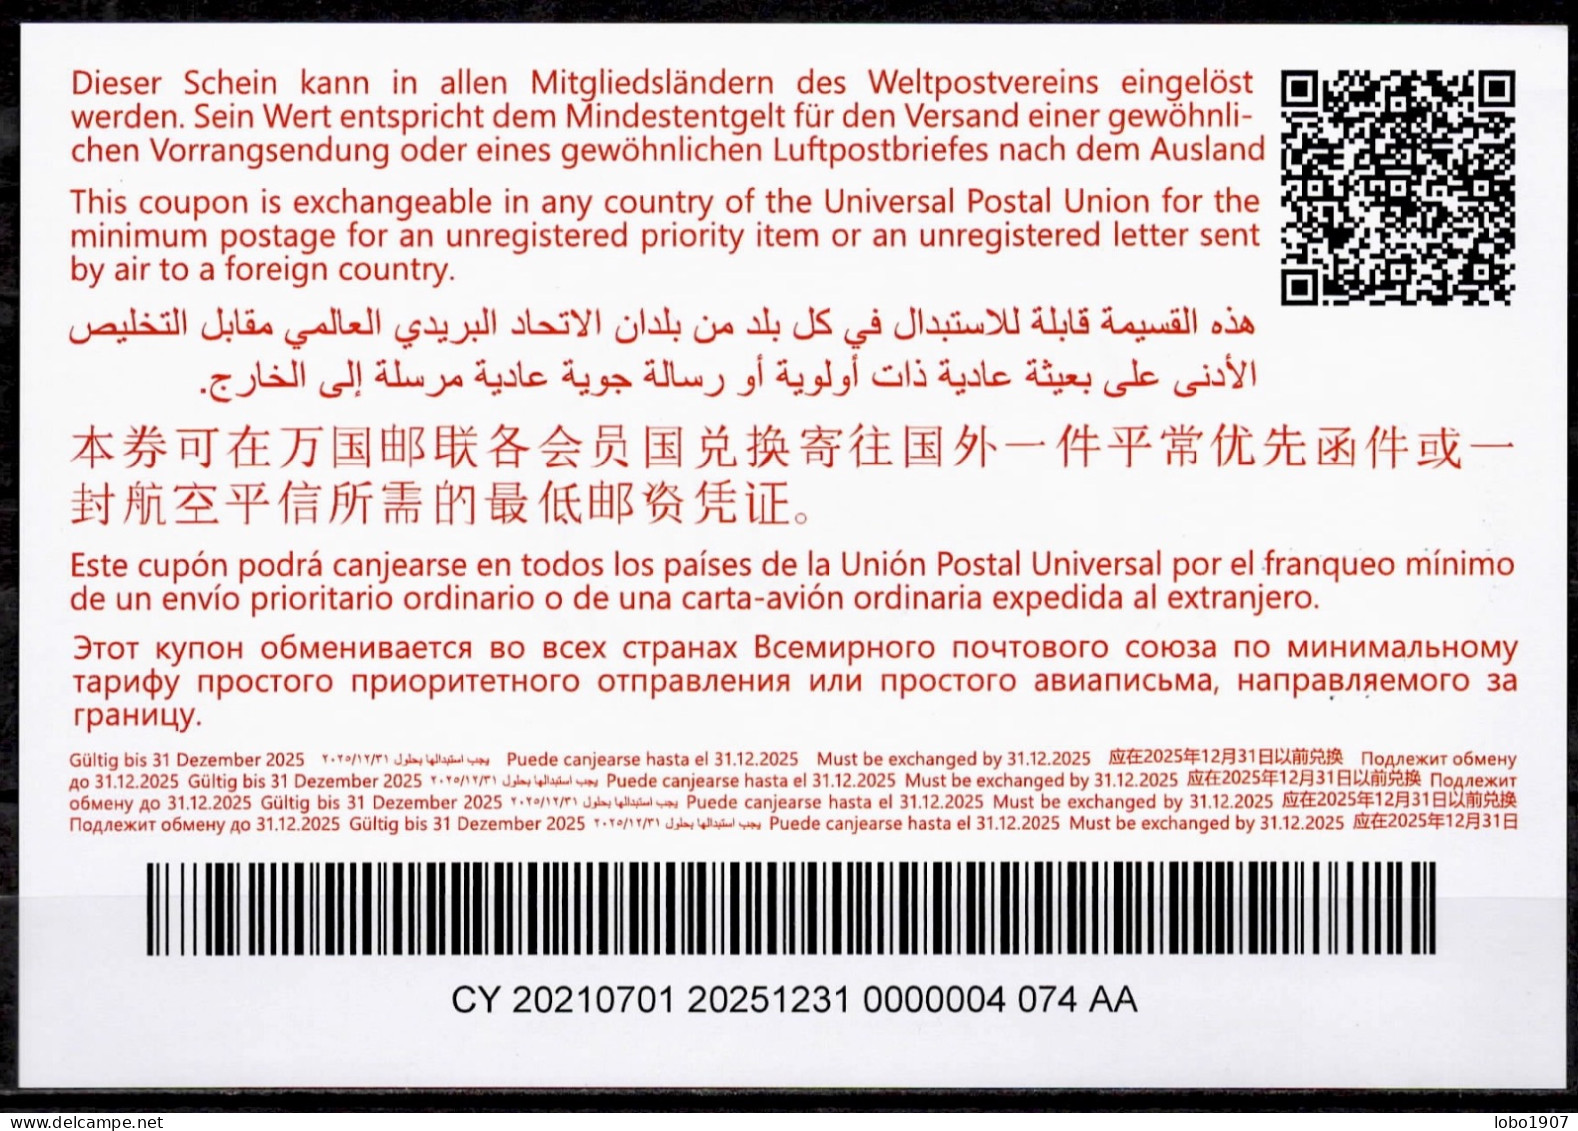 CHYPRE CYPRUS  Abidjan Type Ab47  20210701 AA  Int. Reply Coupon Reponse Antwortschein  IRC IAS  LEFKOSIA 01.09.2021 FD! - Cartas